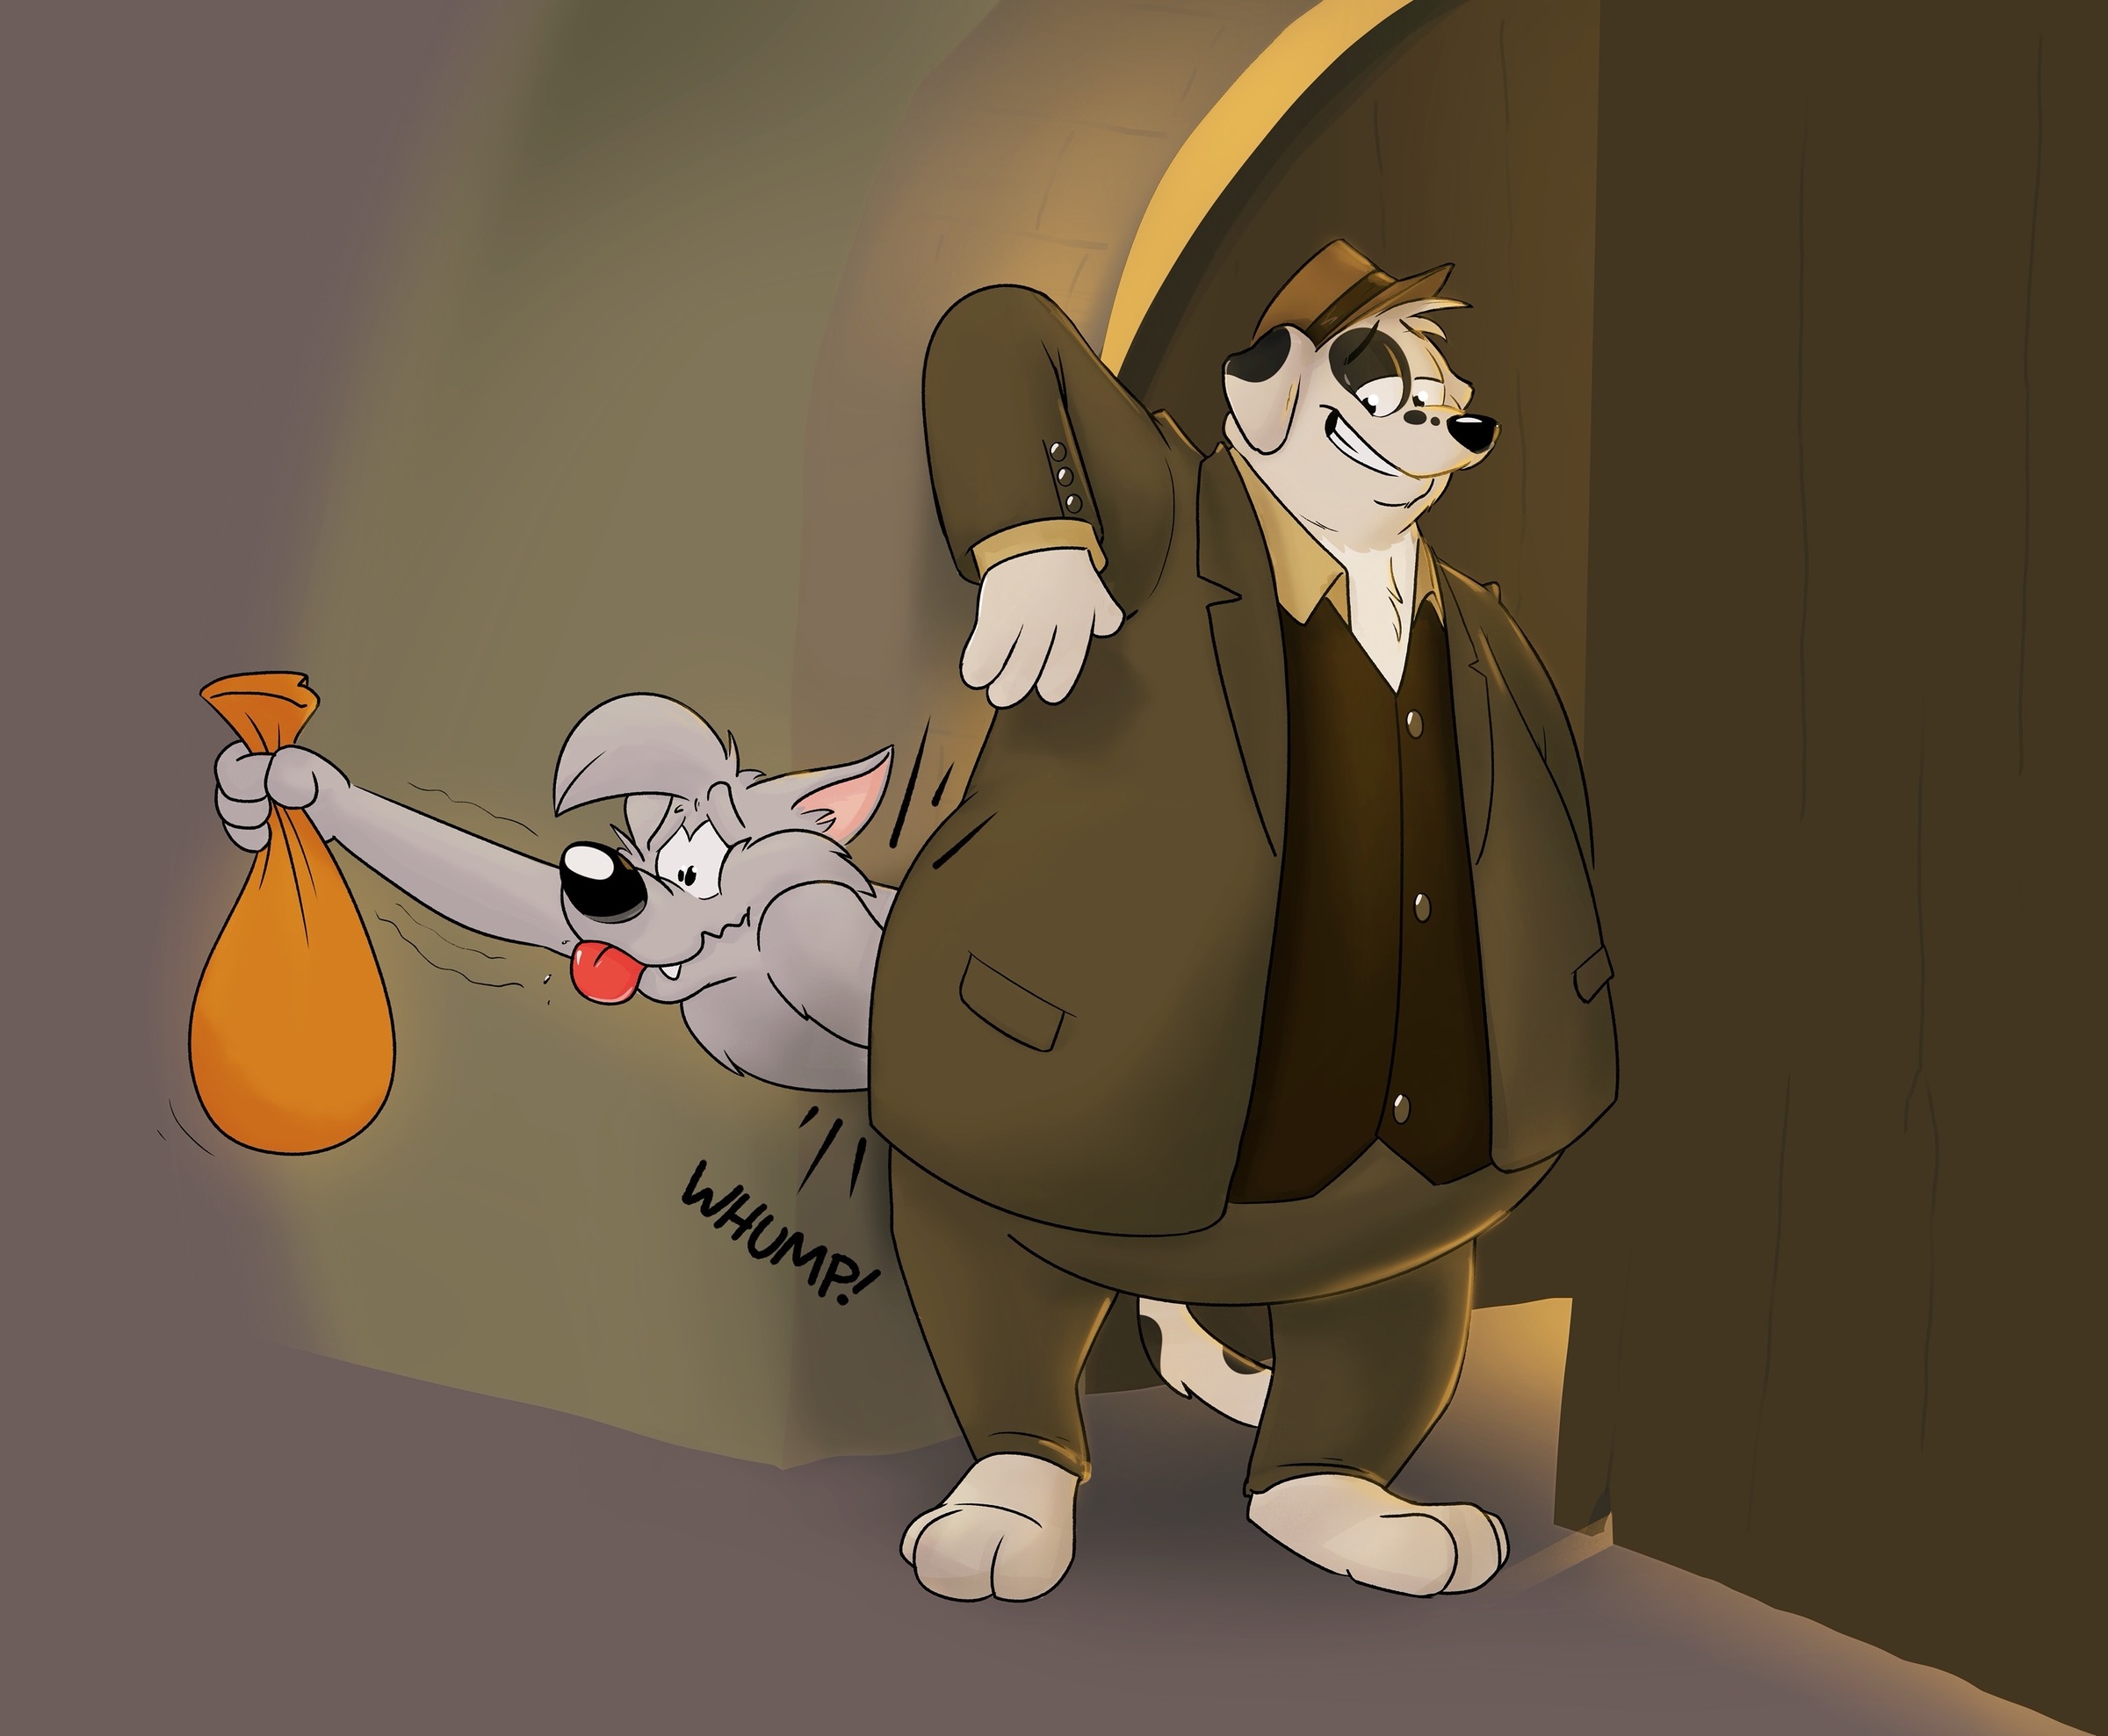 A fat dog in a dapper suit and hat squashing a cartoon wolf against a wall. The wolf is holding a bag of swag.